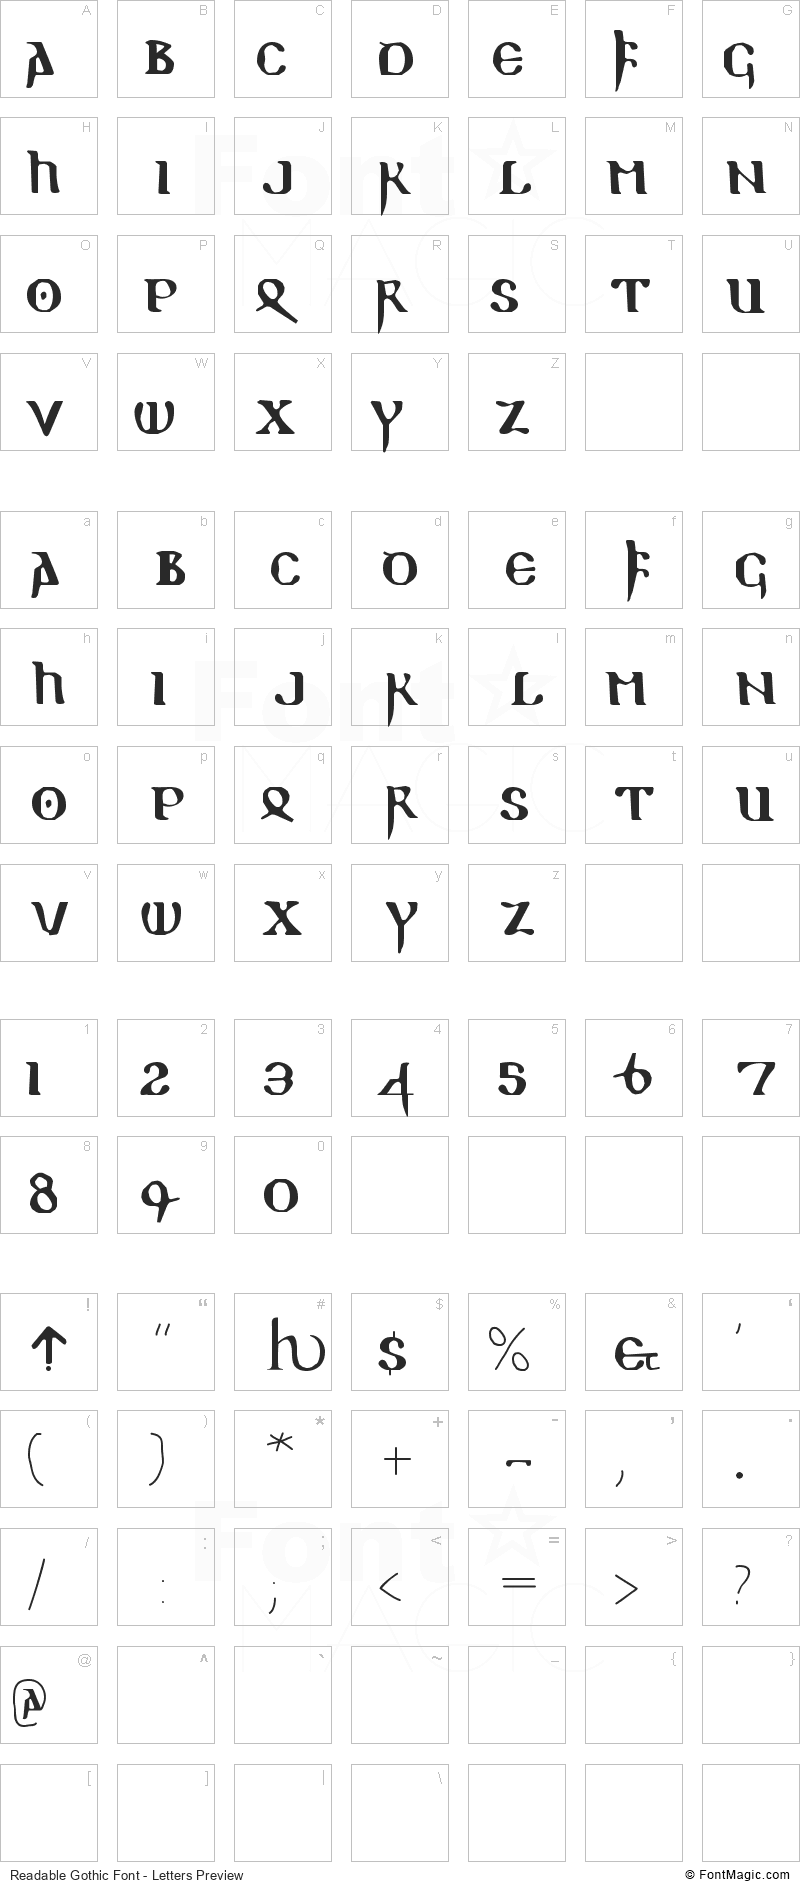 Readable Gothic Font - All Latters Preview Chart